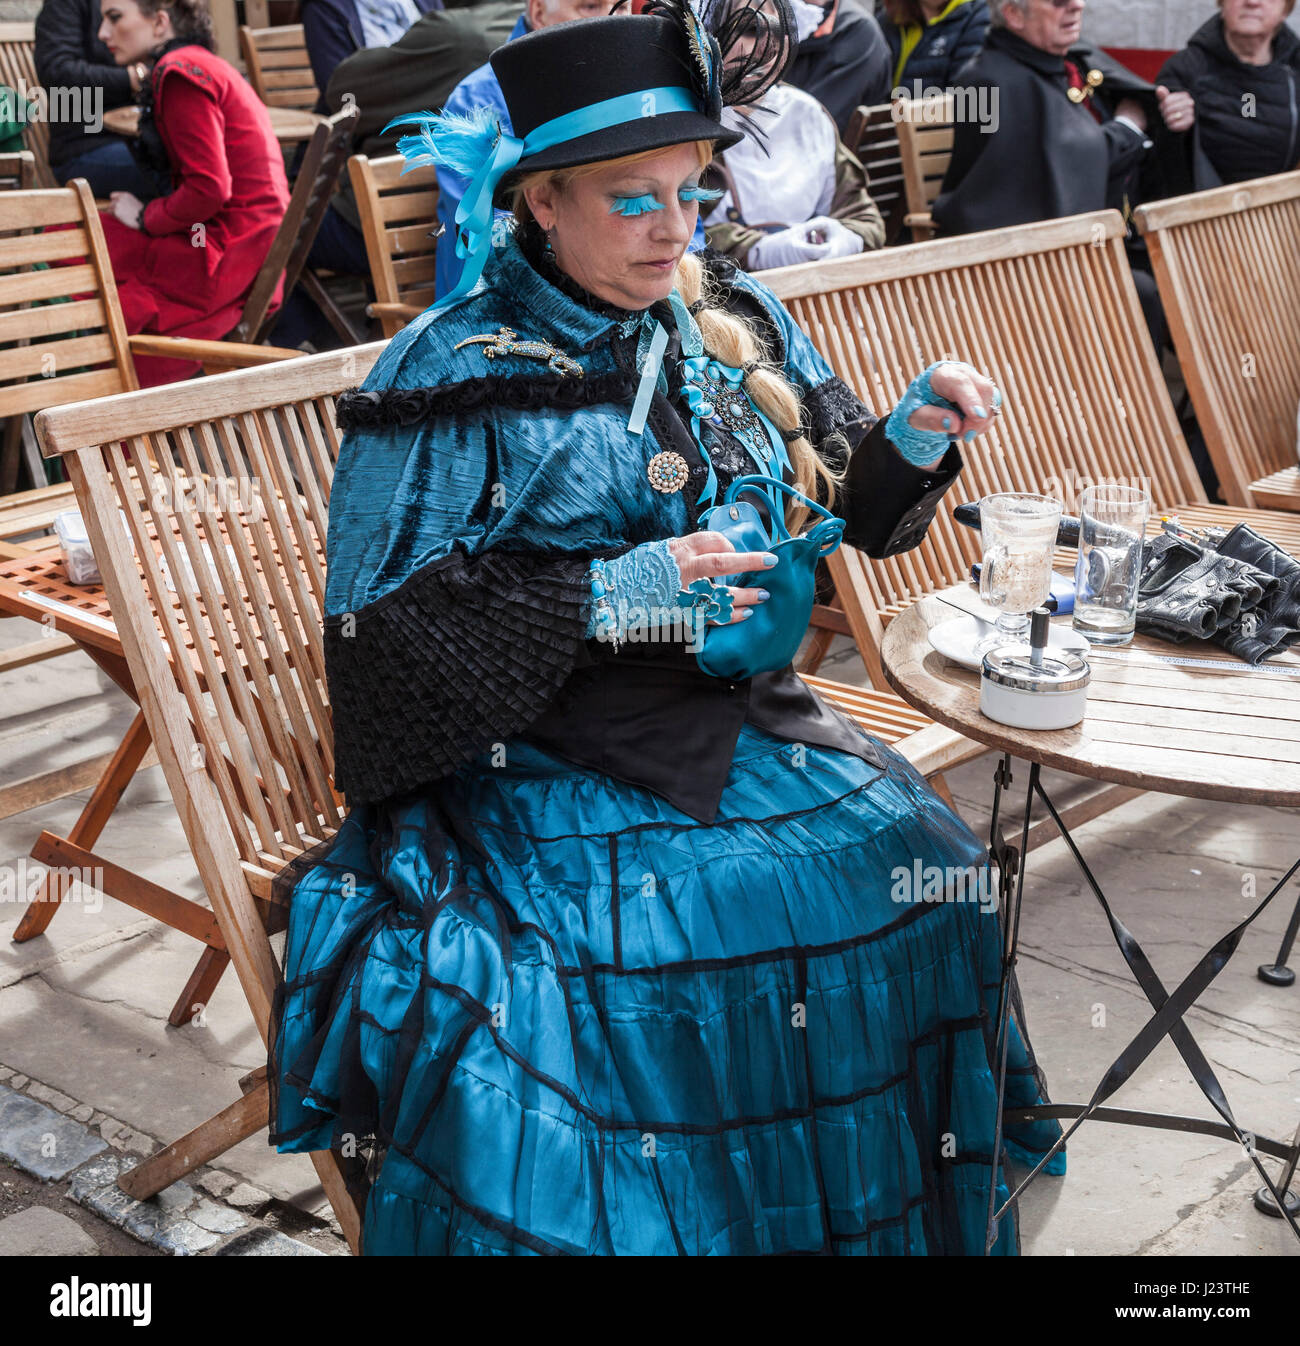 A dressed up woman takes a break from the Whitby goth celebrations and sits down for a drink at a table in the street in North Yorkshire,England. Stock Photo